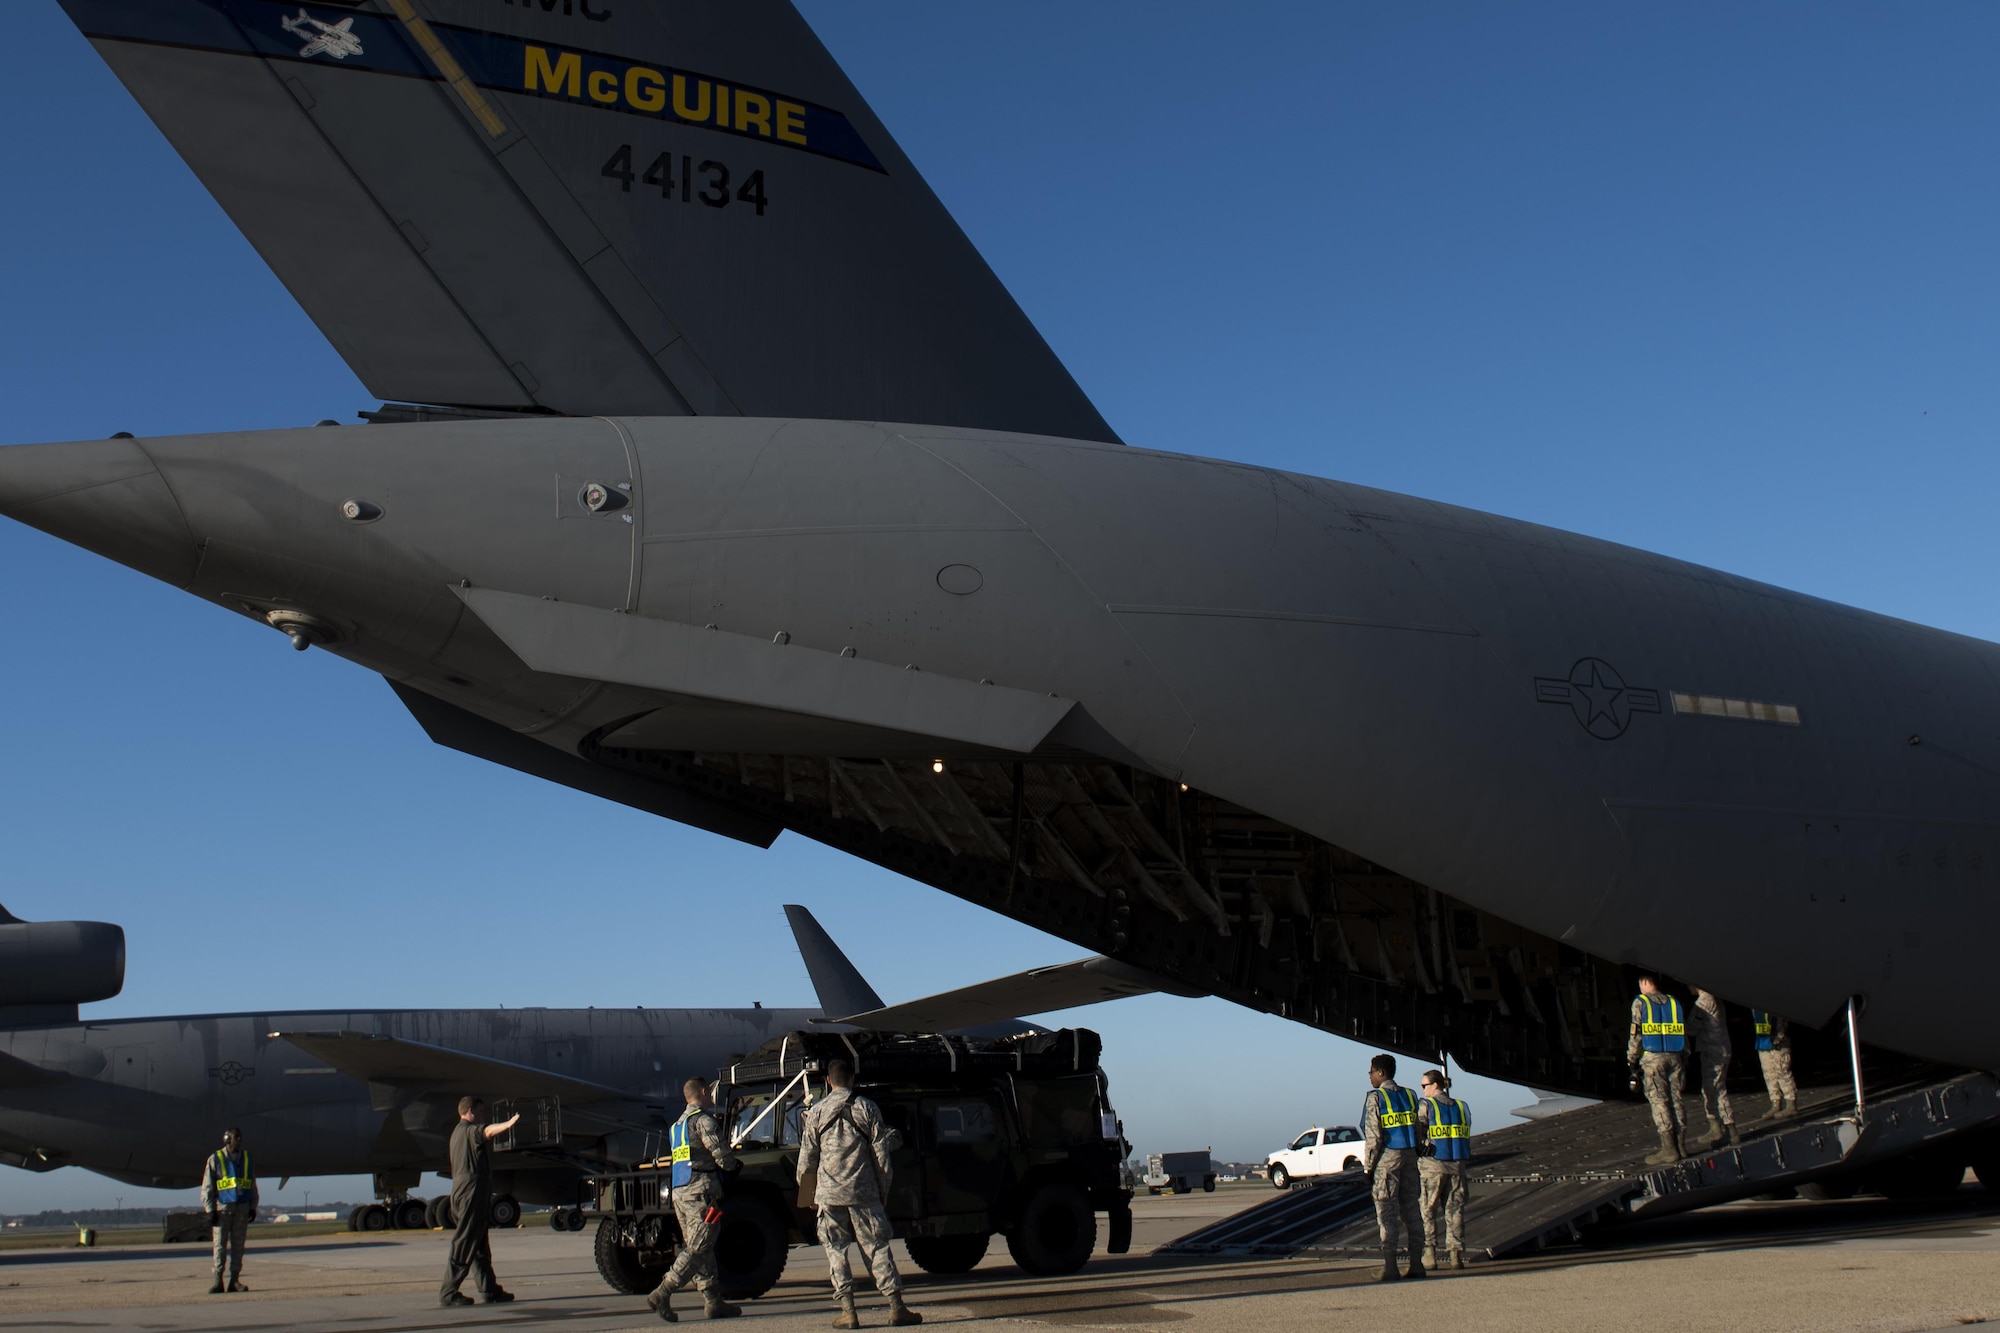 Airmen from the 6th Airlift Squadron and the 305th Aerial Port Squadron load a Humvee onto a C-17 Globemaster III at Joint Base McGuire-Dix-Lakehurst, N.J., Oct. 6, 2016. Mission partners at JB MDL provided the 621st Contingency Response Wing with mobility support as they sent more than 30 Airmen to Haiti in support of disaster relief operations in response to Hurricane Matthew. 